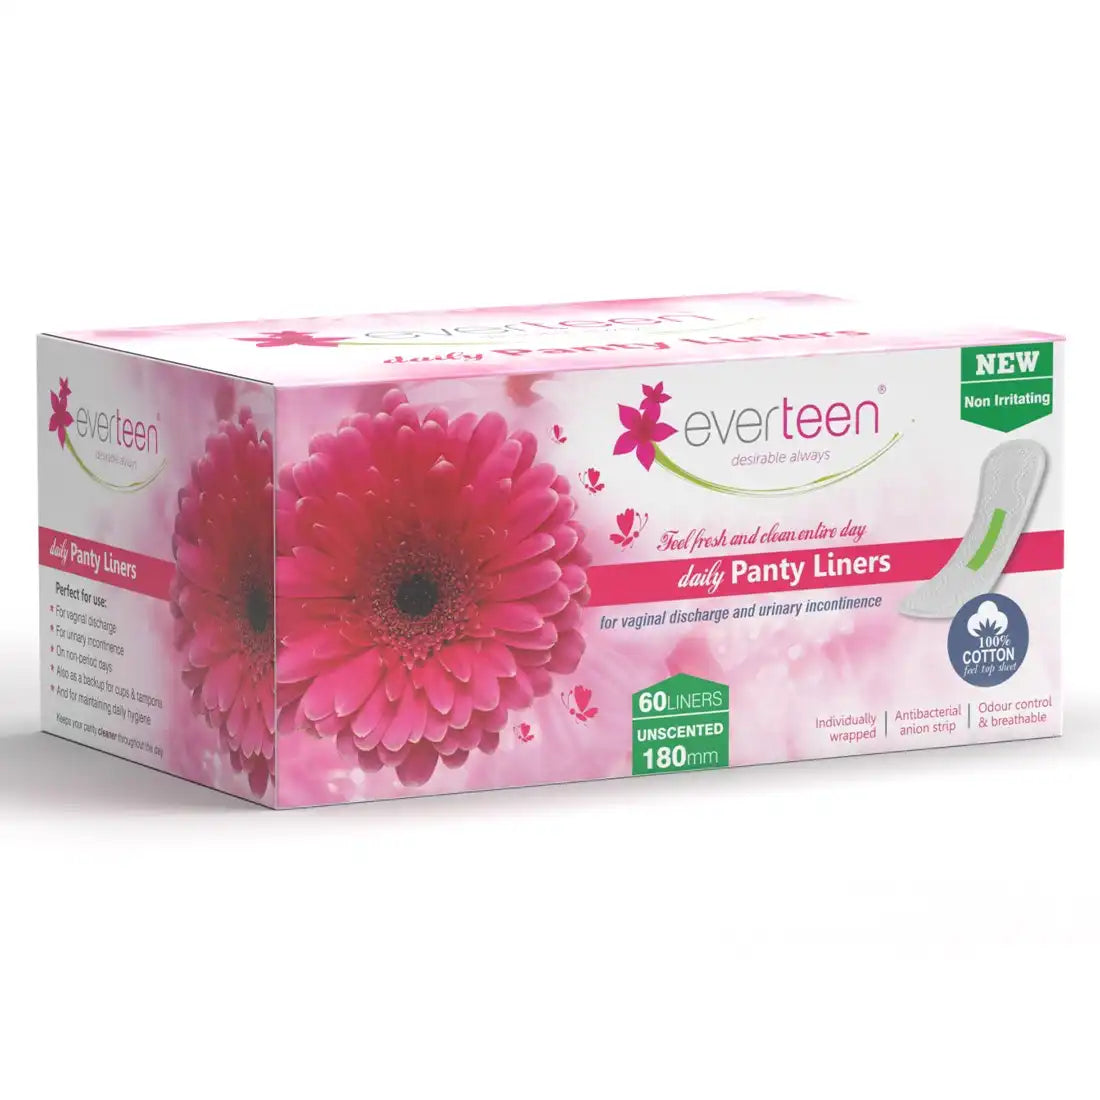 Buy everteen Natural Cotton Daily Panty Liners for Women on everteen